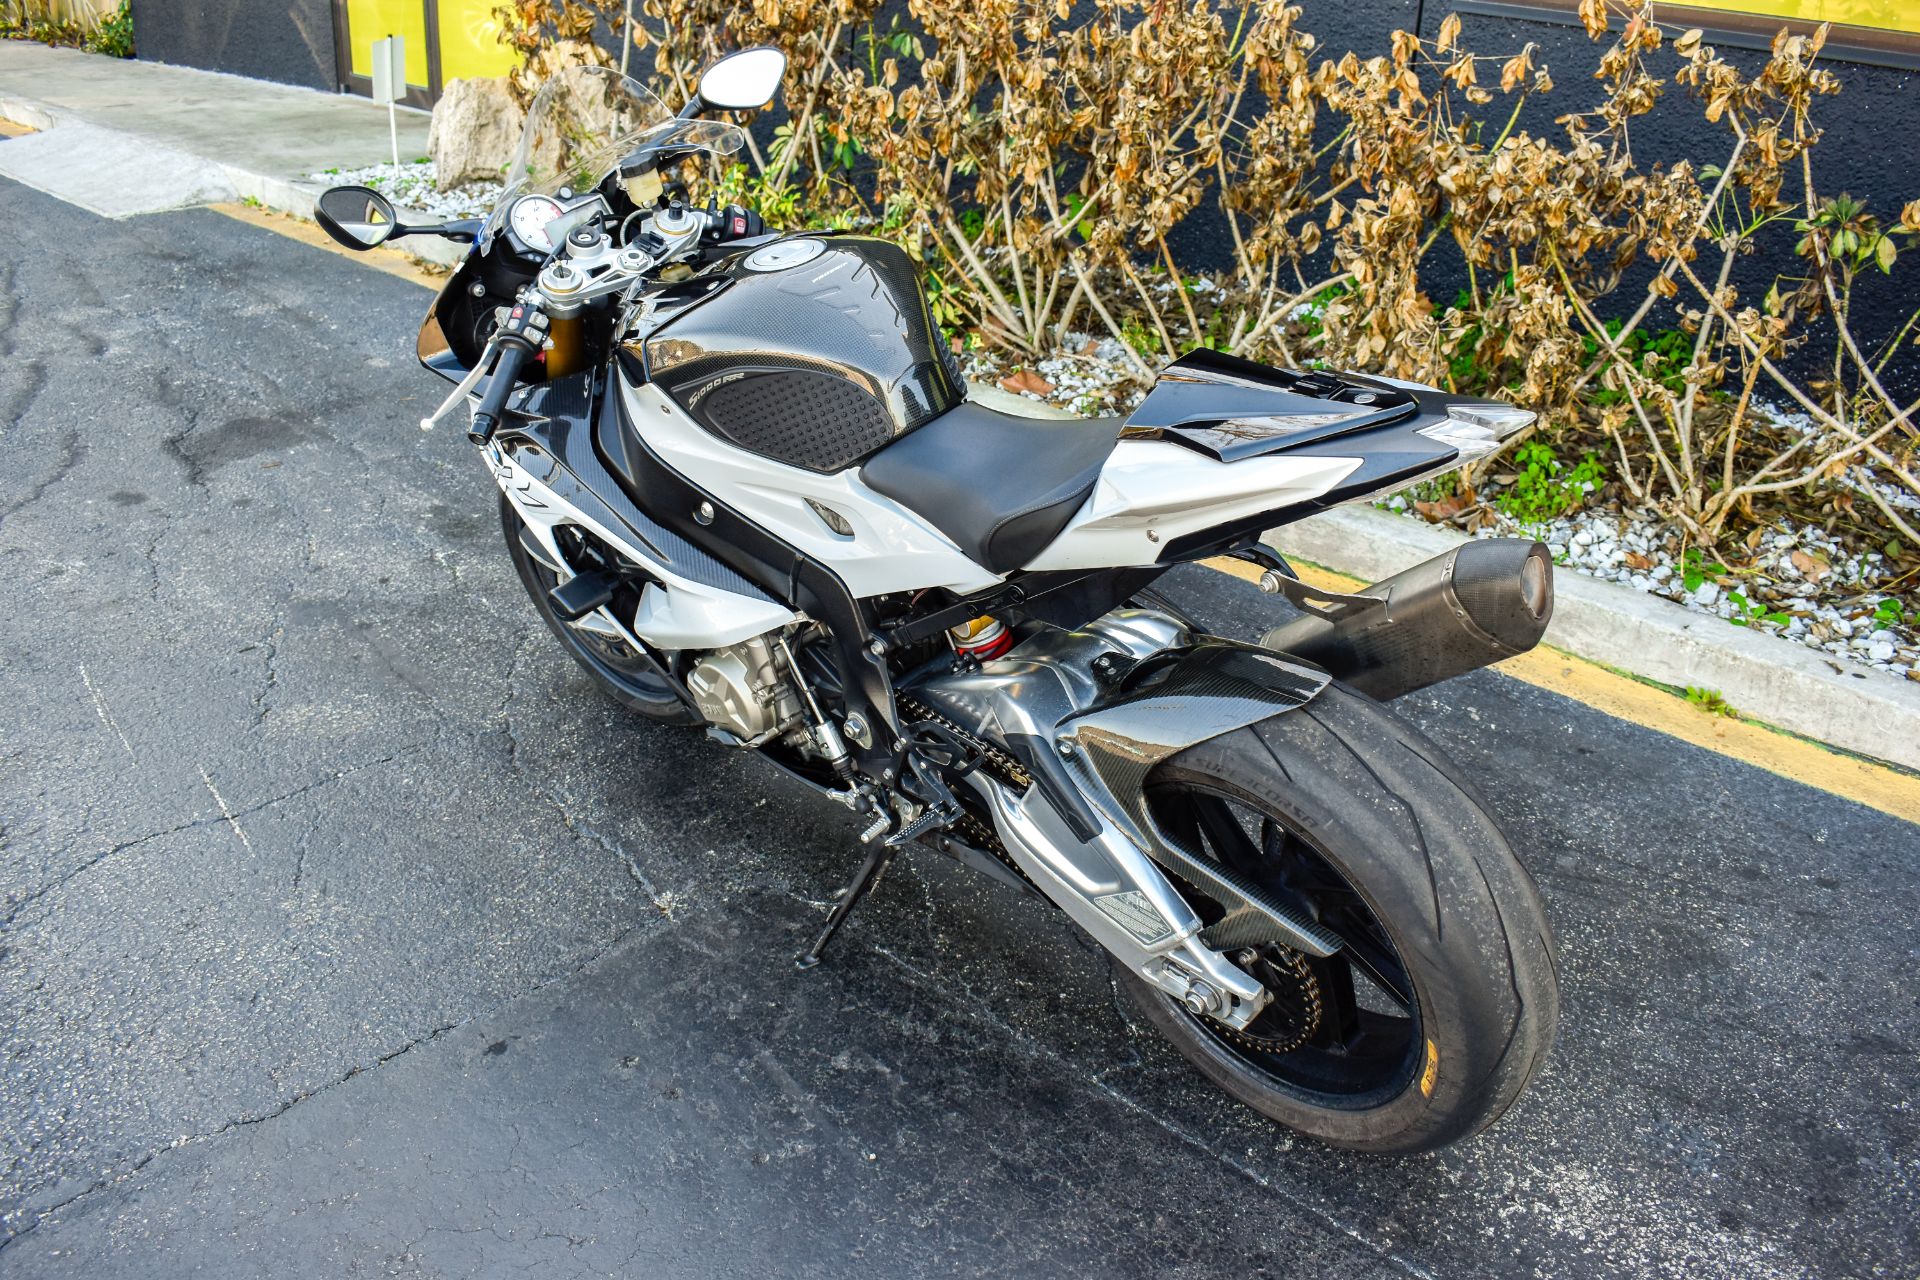 2015 BMW S 1000 RR in Jacksonville, Florida - Photo 17